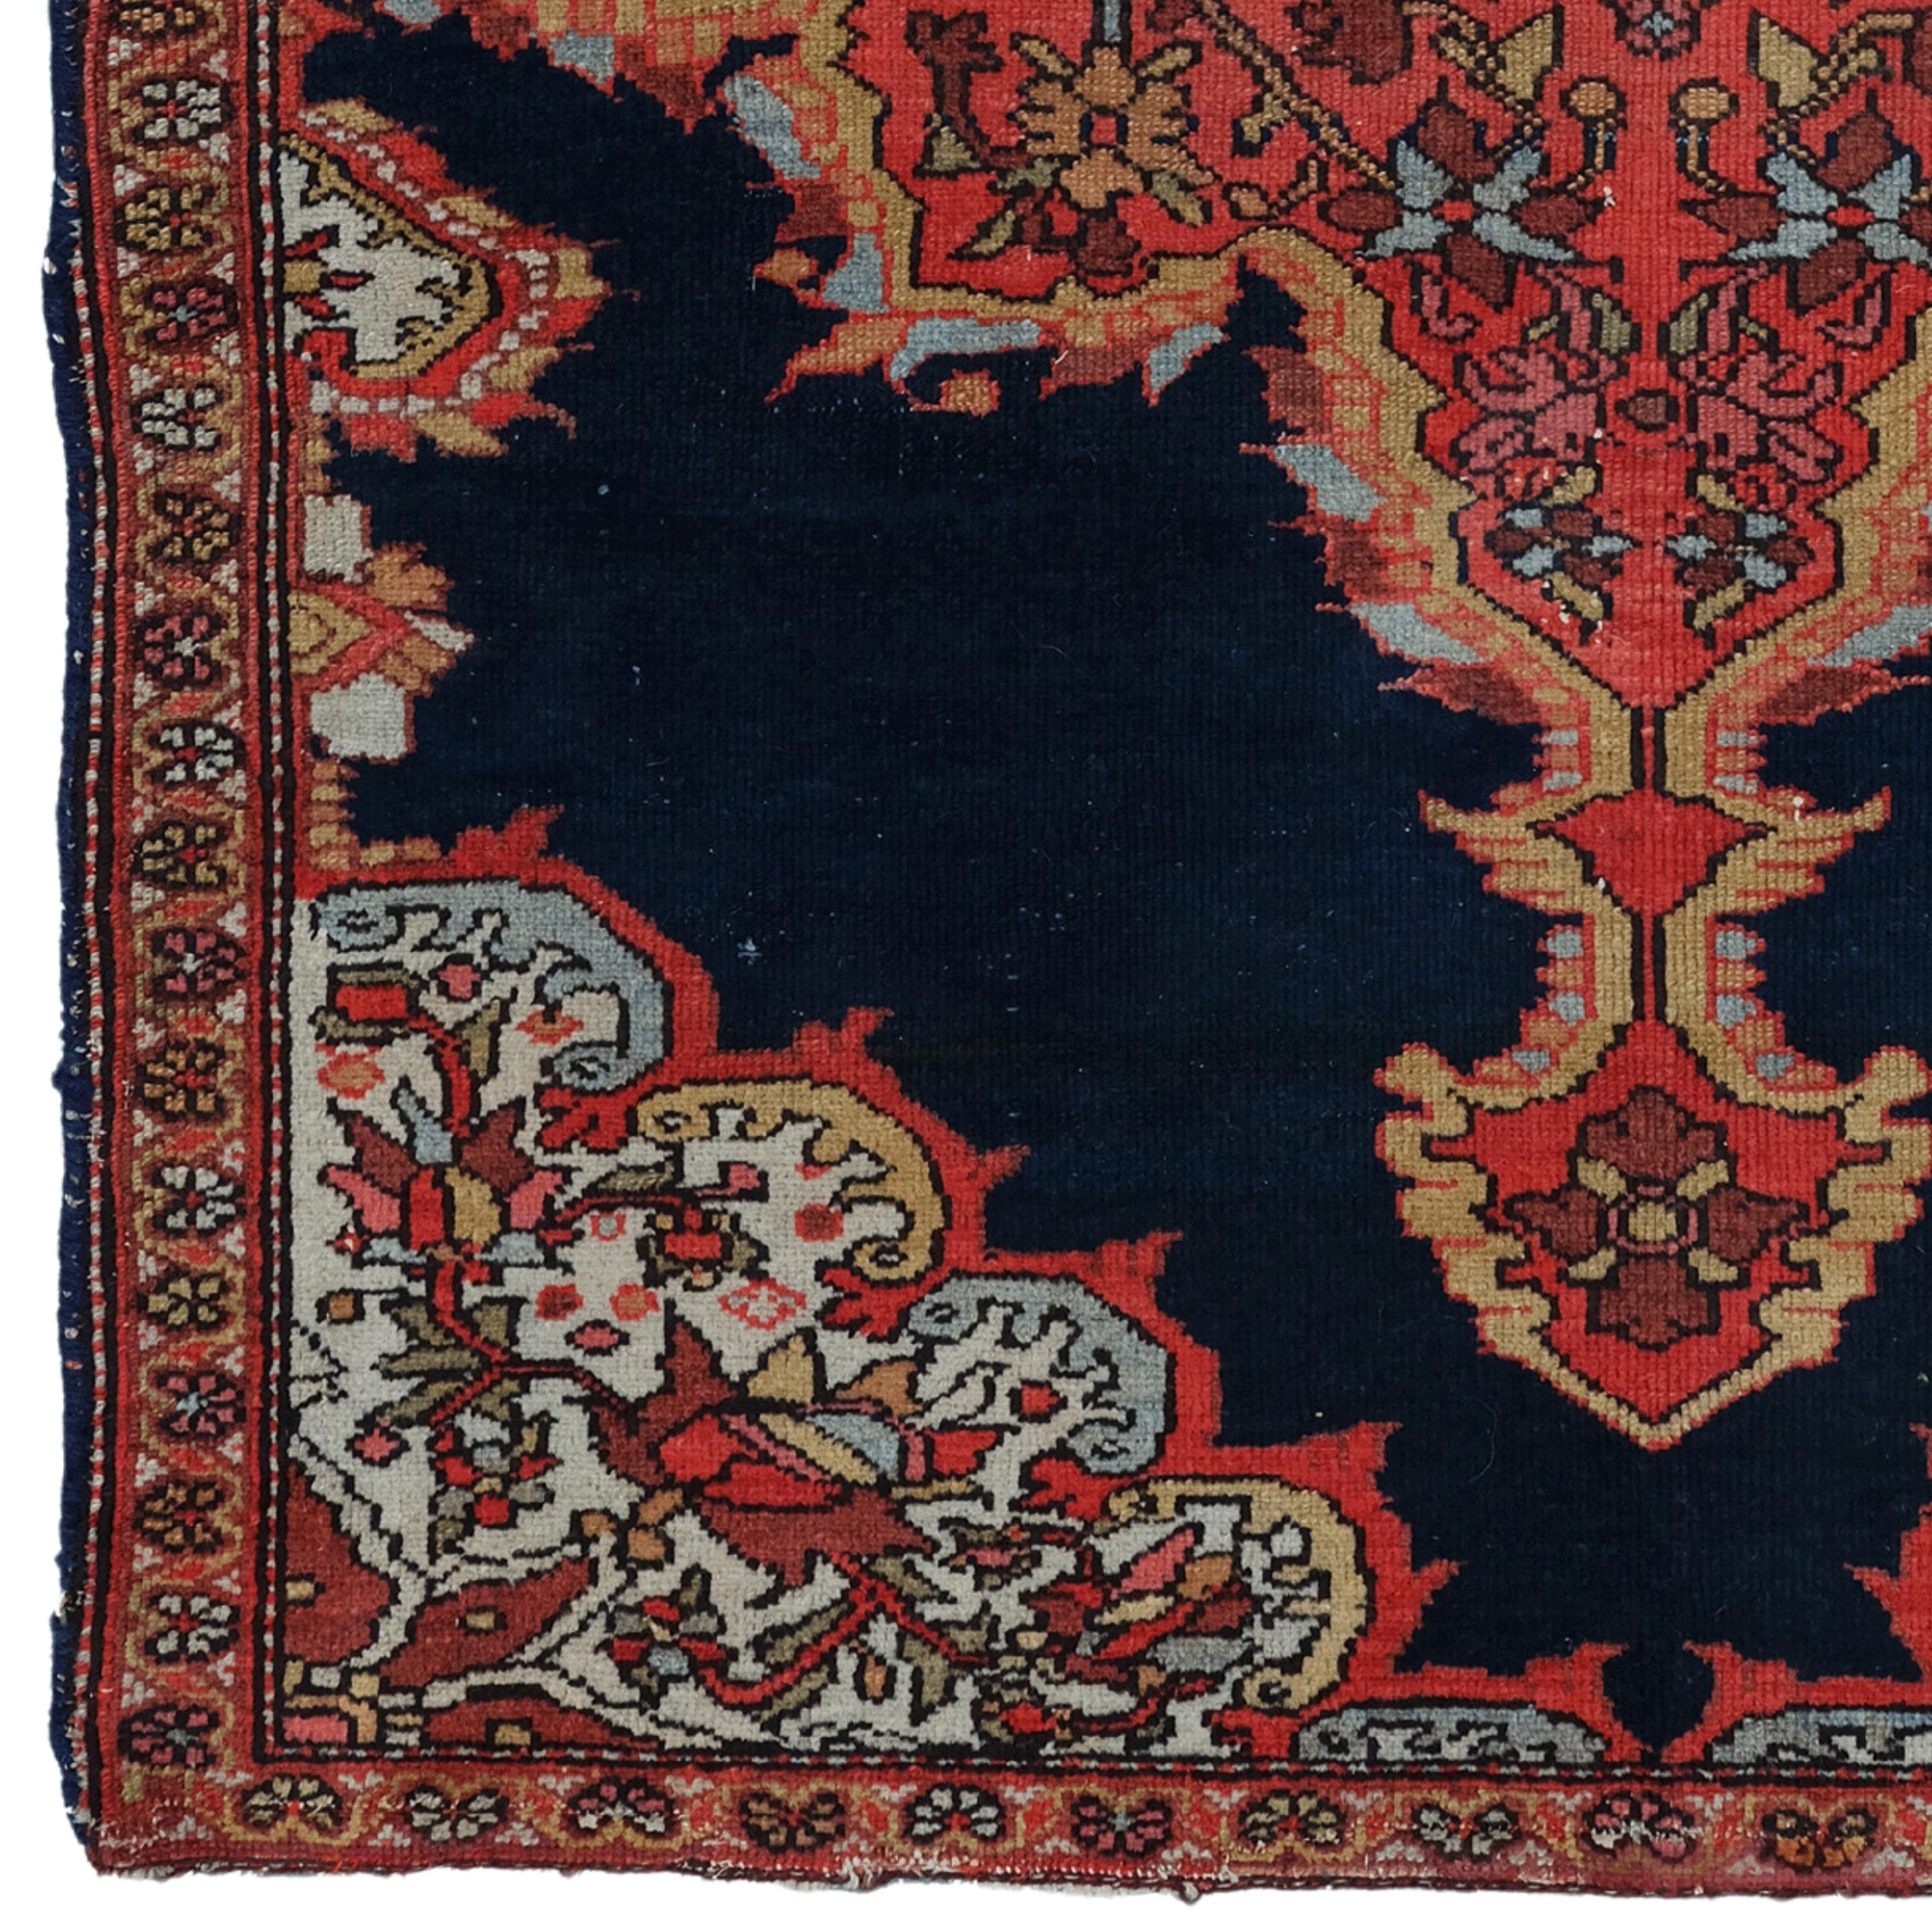 This elegant 19th-century Melayer carpet is an example of the most exquisite handcraftsmanship of its period. It adds nobility to any space with its rich history and sophisticated design. Vibrant red and golden motifs embroidered on a dark blue